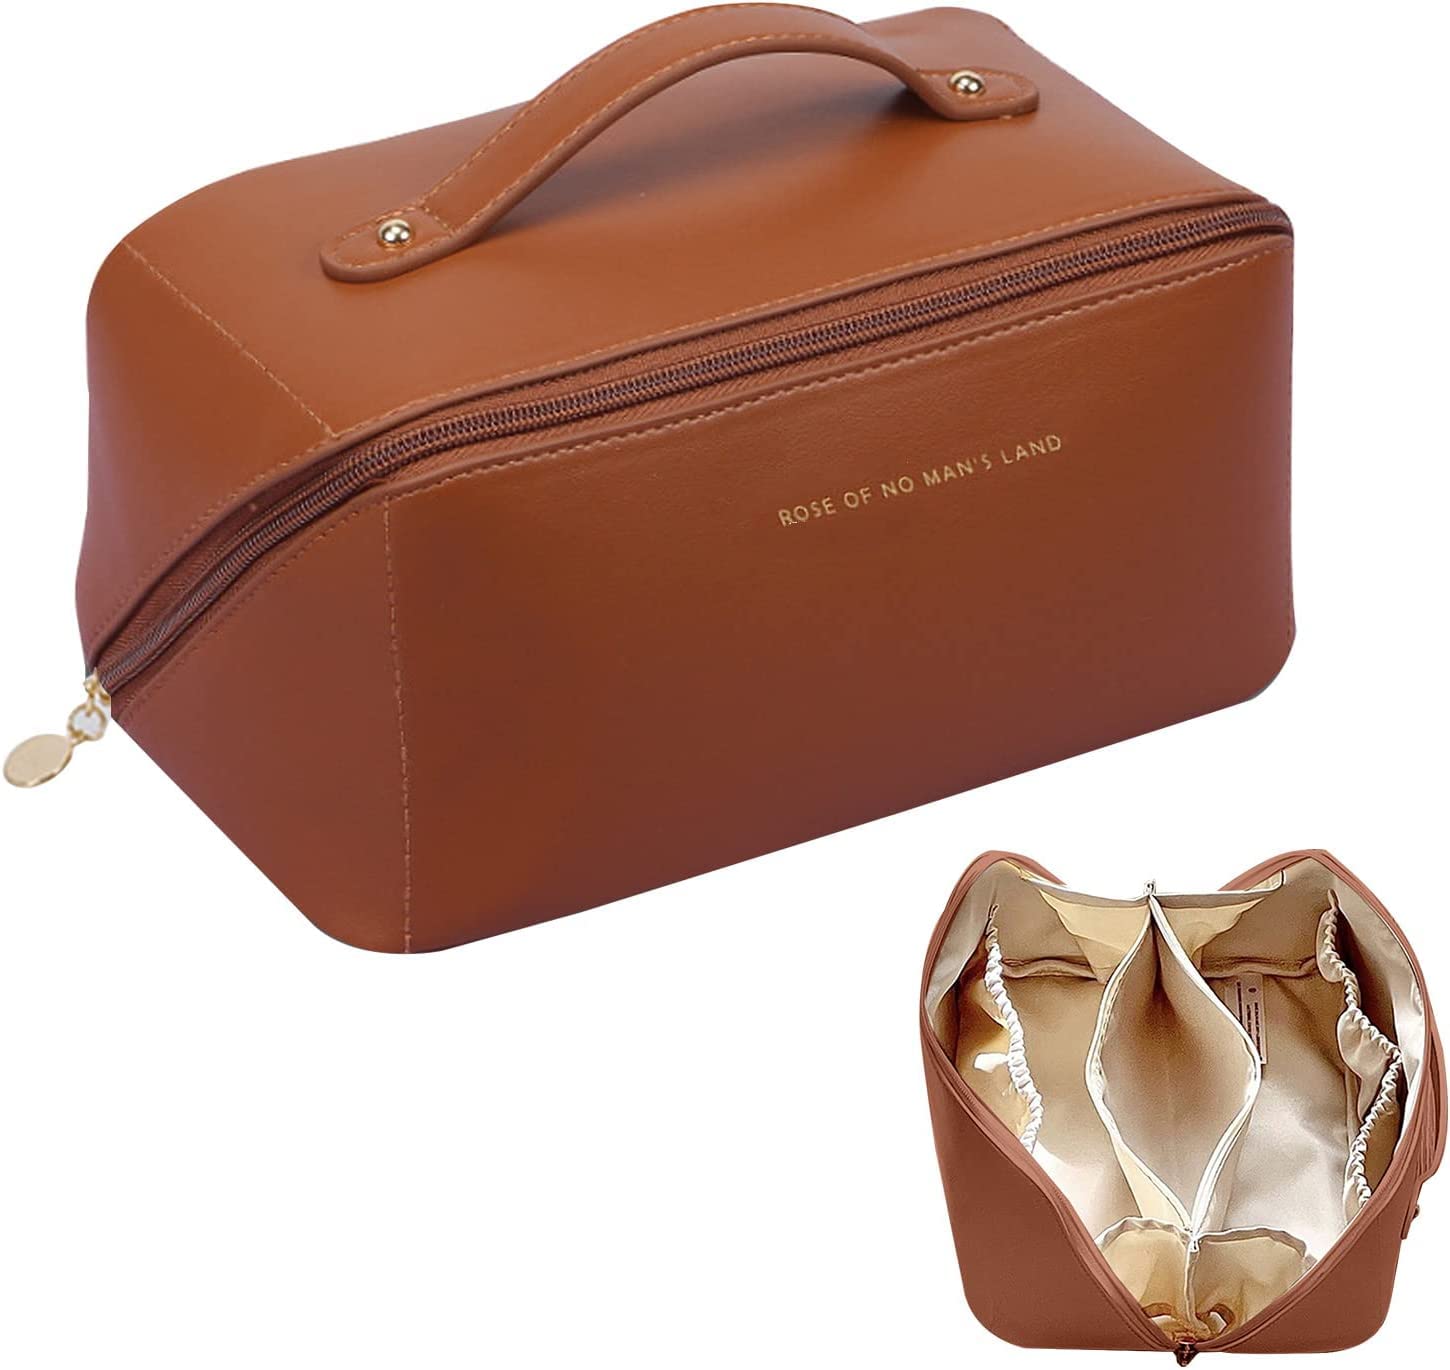 Large Capacity Foldable Travel Cosmetic Bag in Brown color